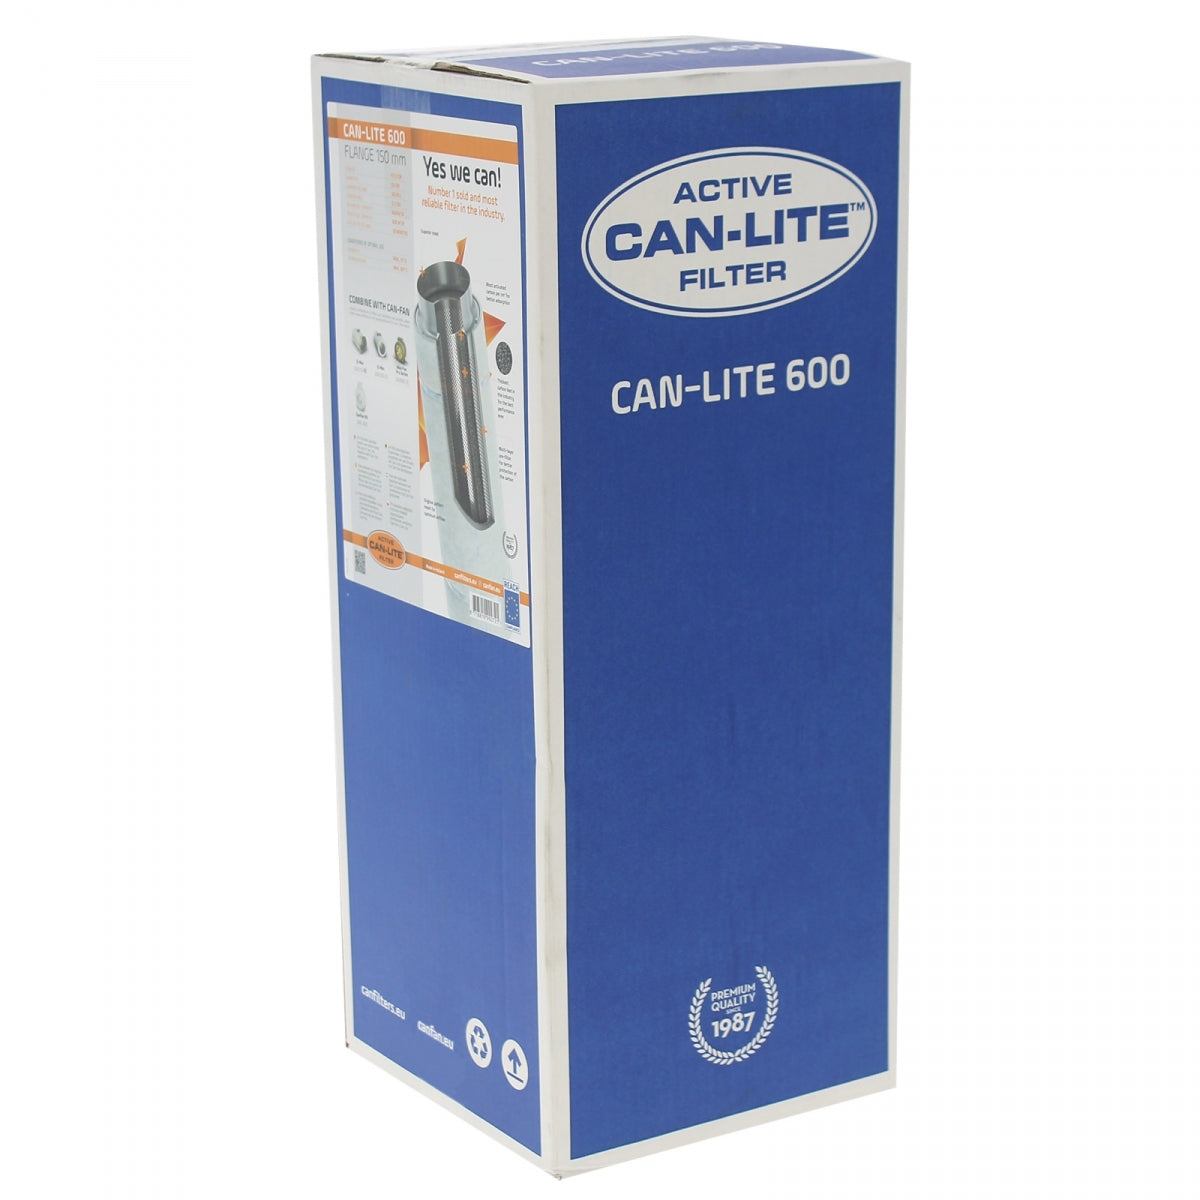 Can-Lite-Filter 600 m3/h – 150 mm